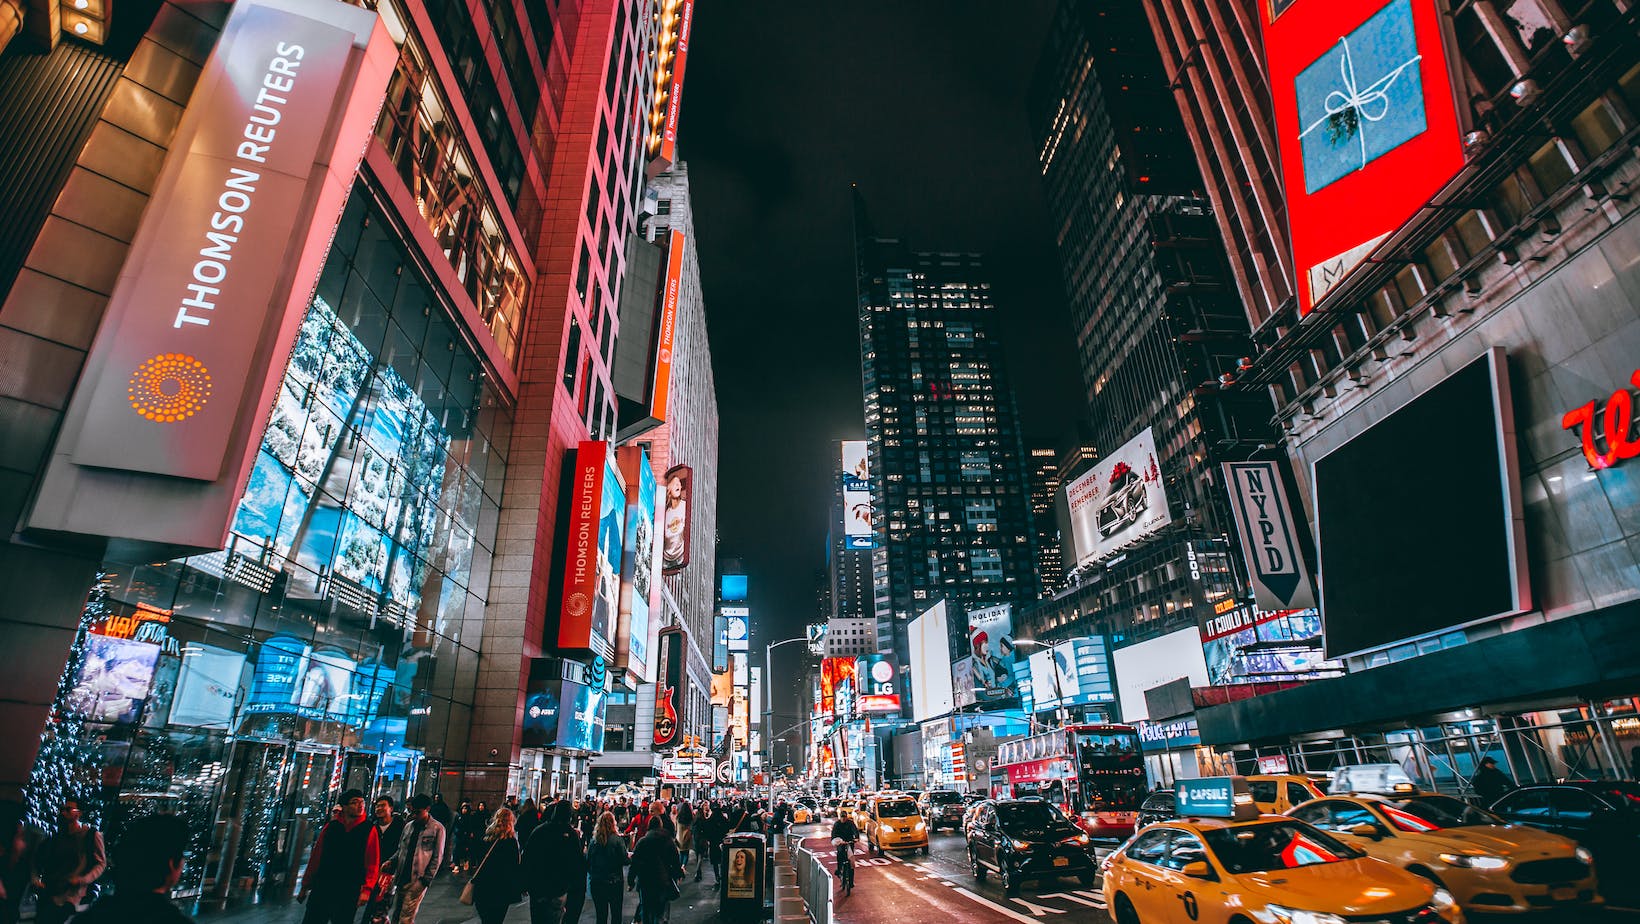 7 Things to Do in Times Square